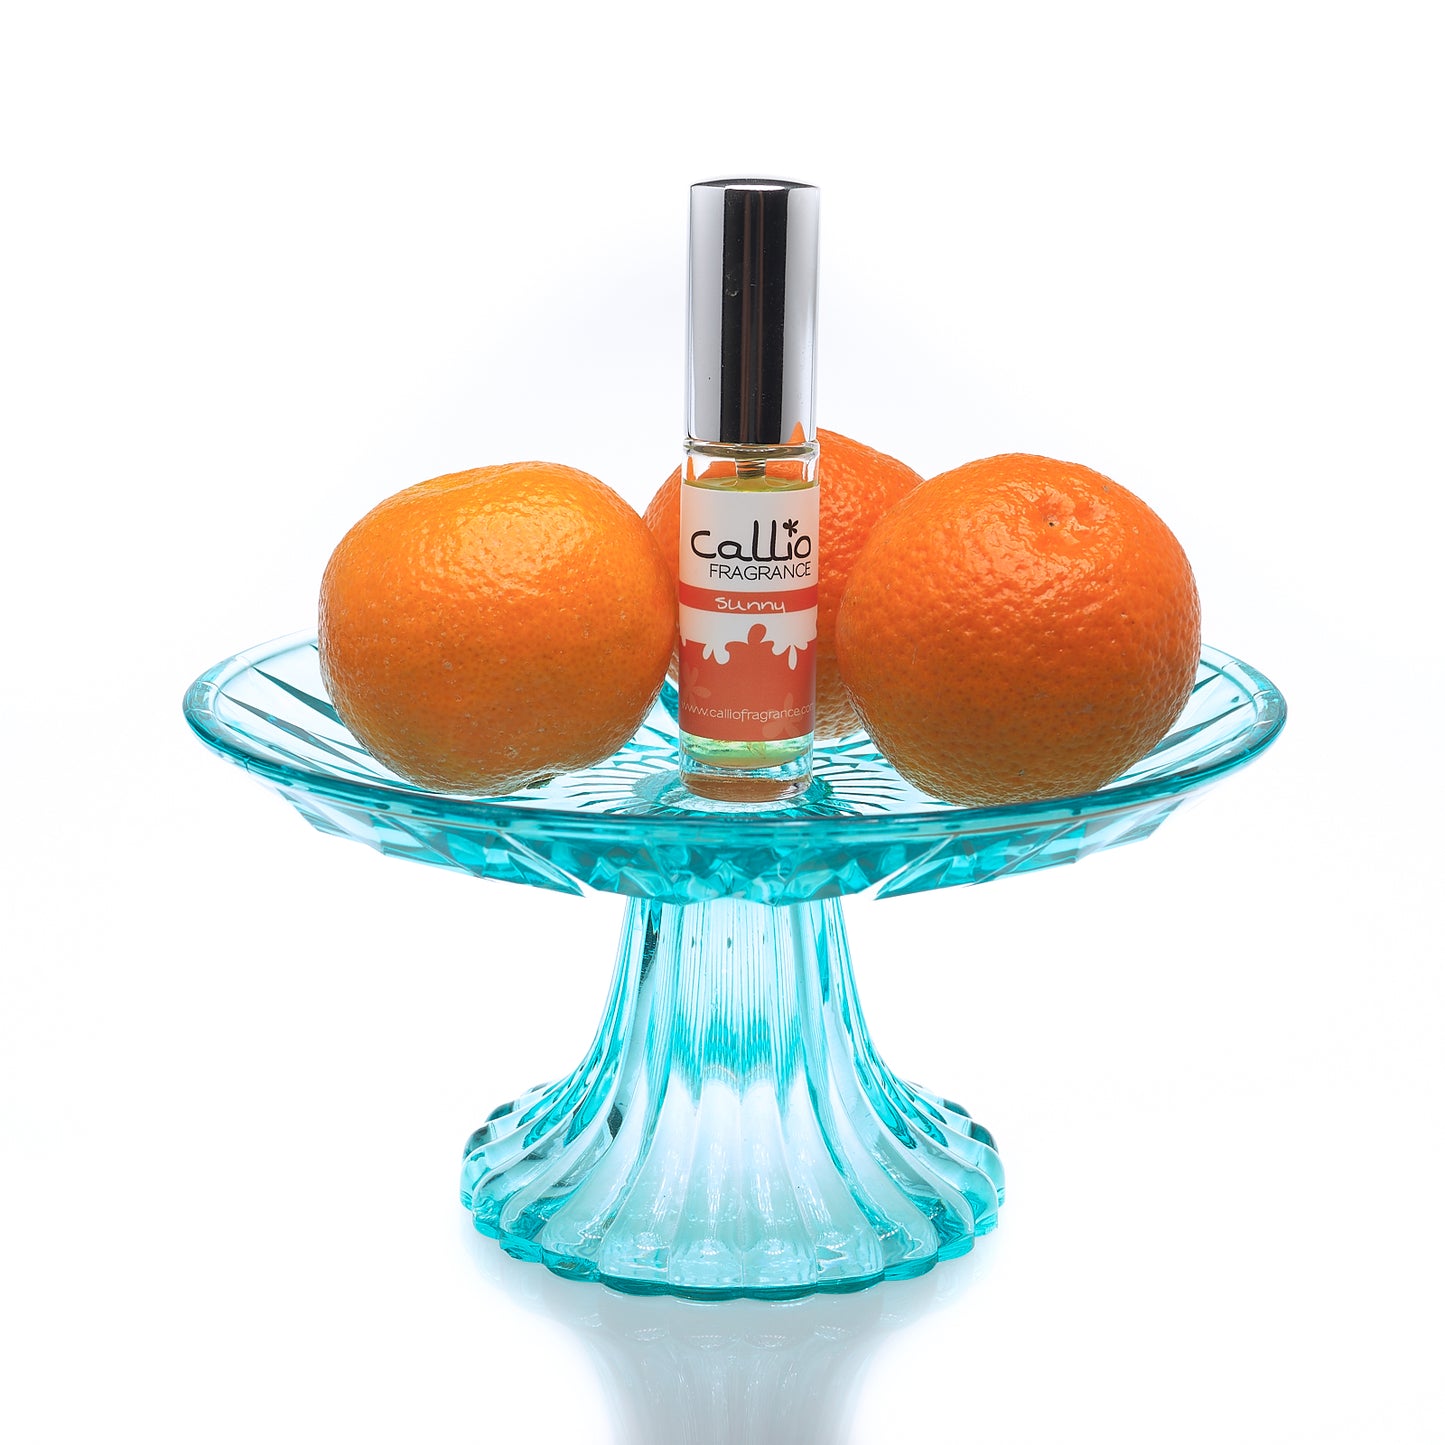 Sunny Travel Perfume Spray on a teal cakestand with 3 mandarin oranges on a white background.